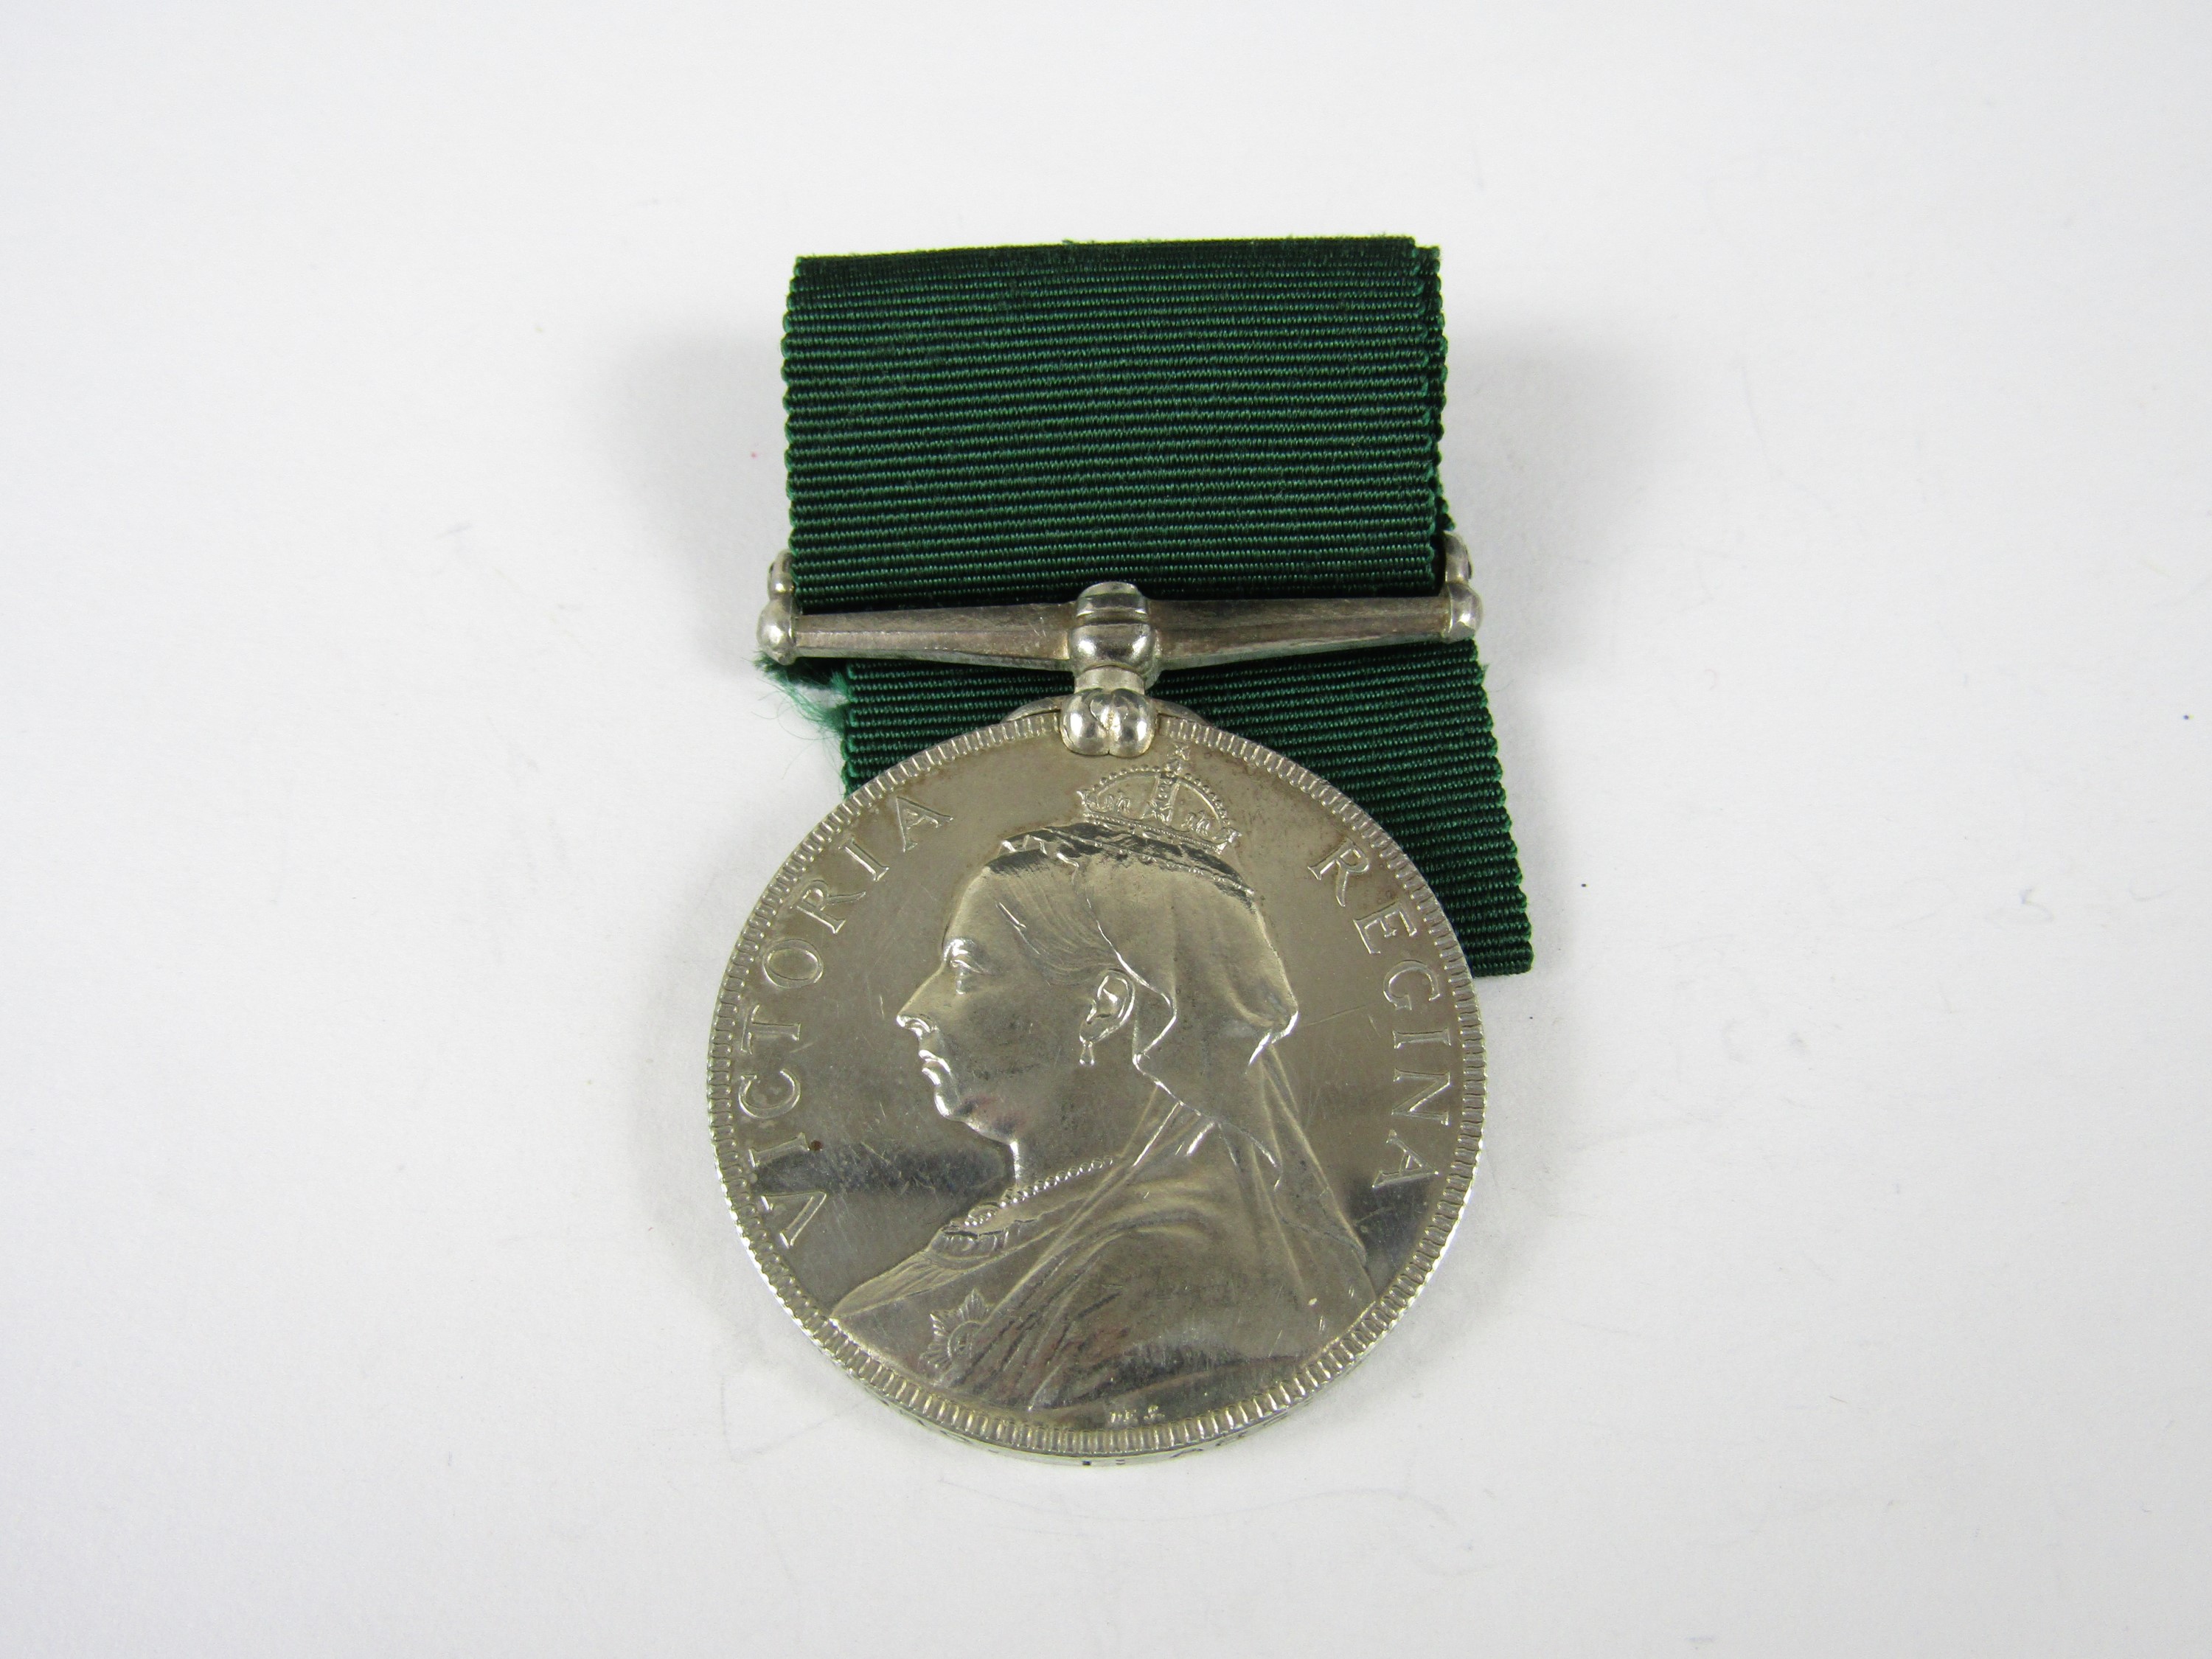 A Victorian Volunteer Long Service medal to 123 Corp J Munro, 1 Arg & Bute Vol Art